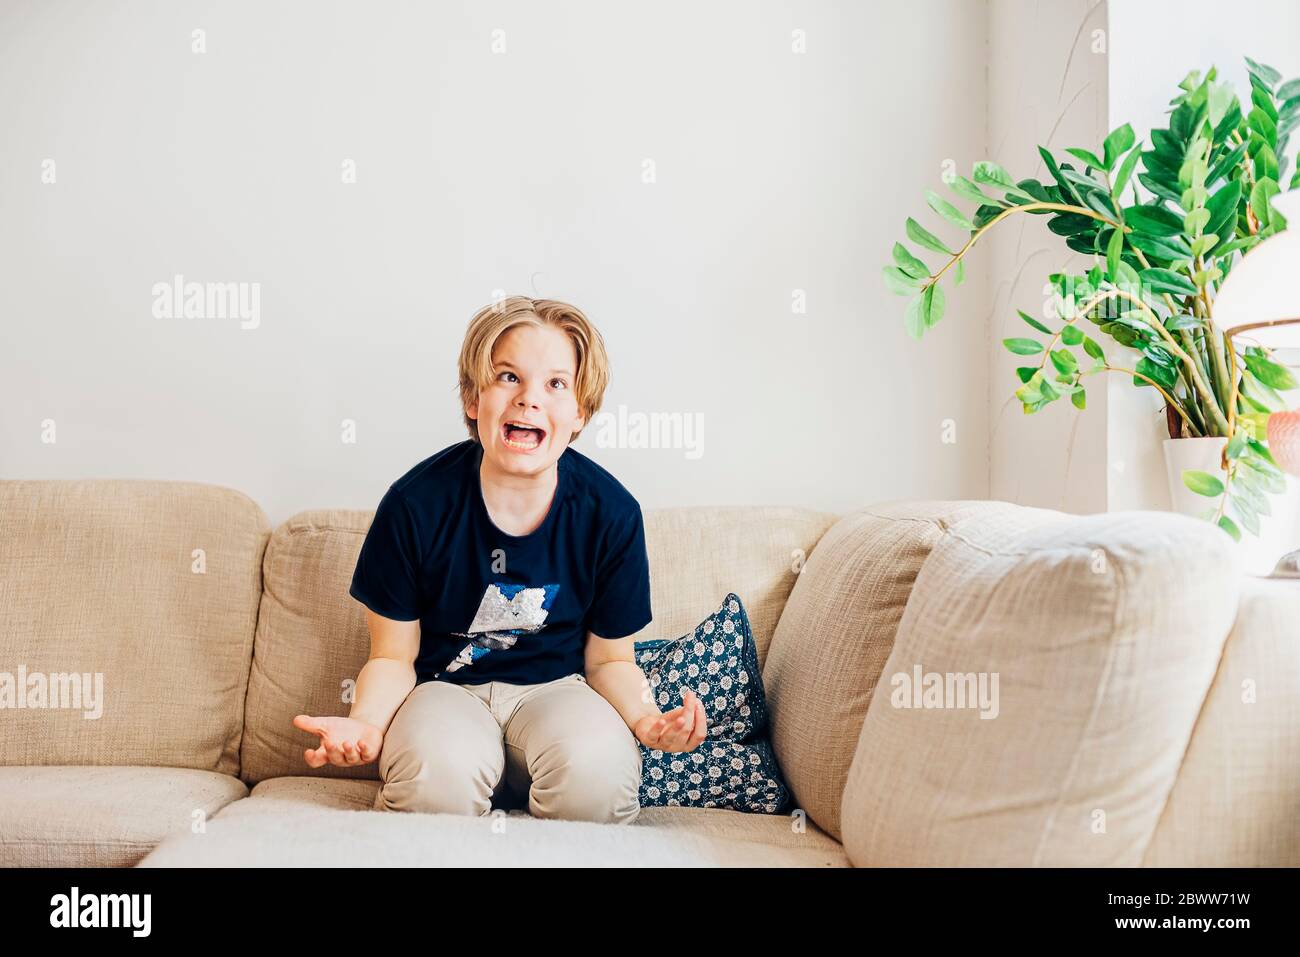 Boy romping around on couch in living room at home Stock Photo